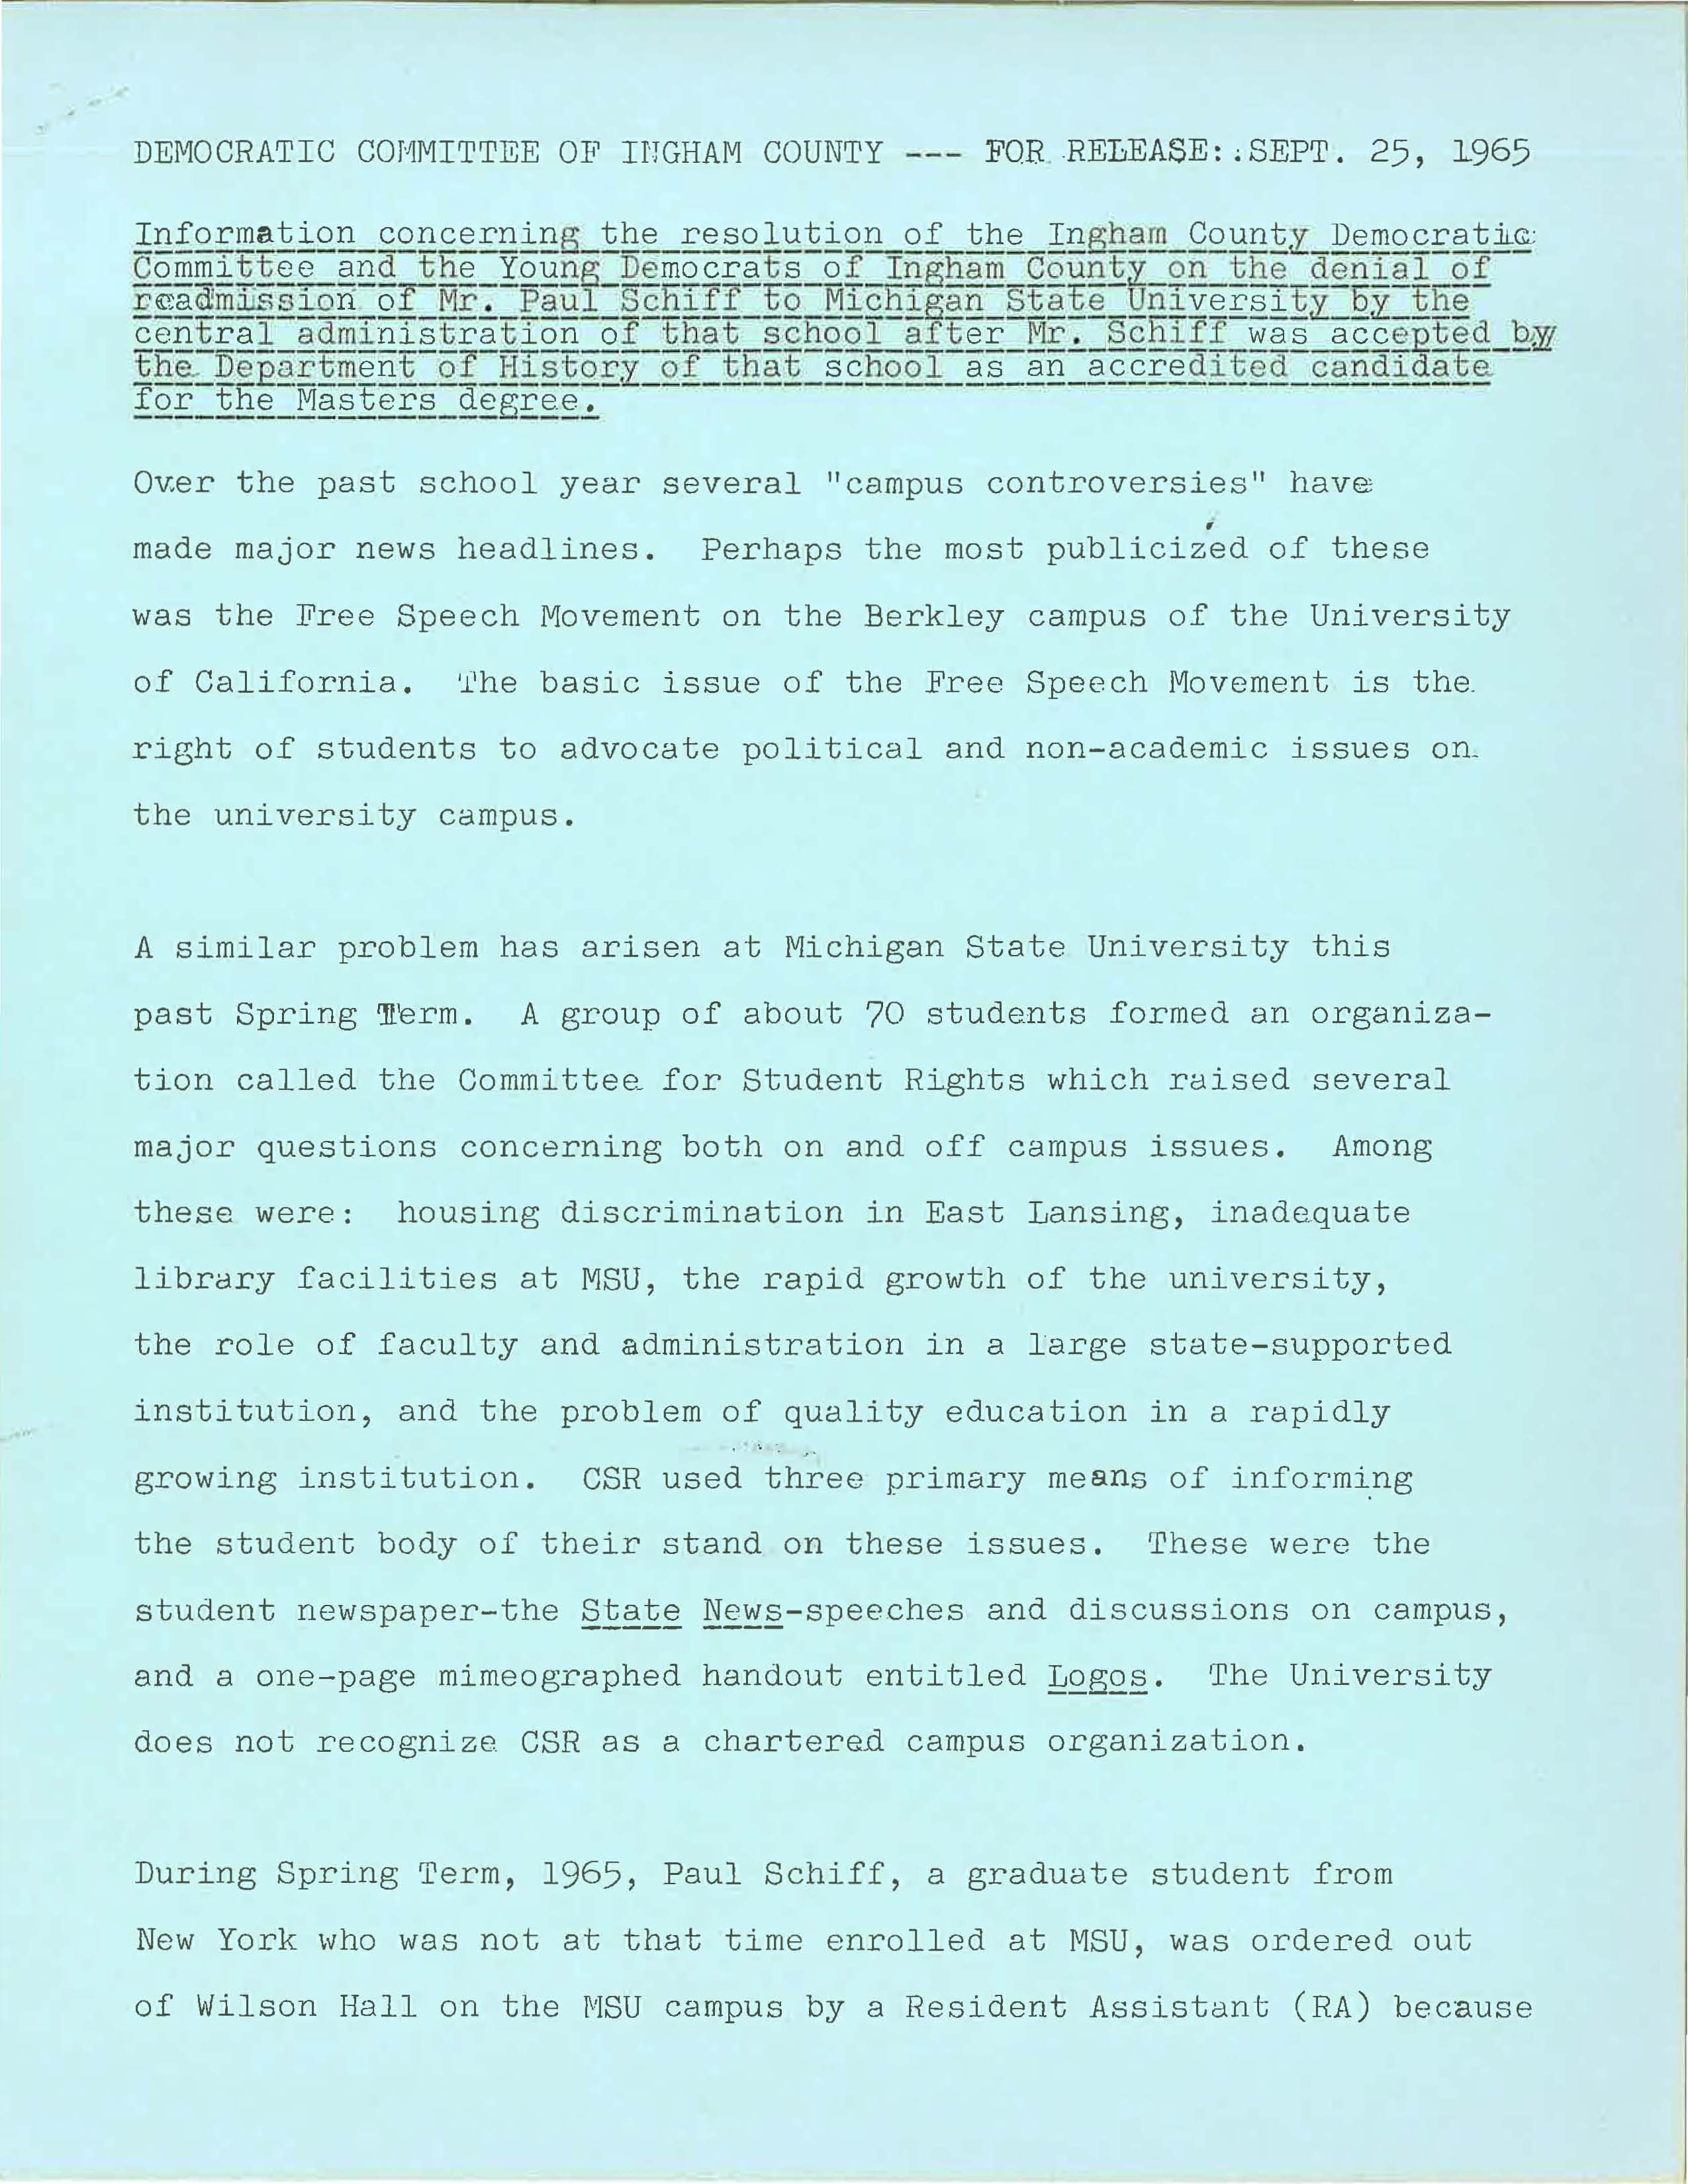 Ingham County Democratic Committee letter, 1965